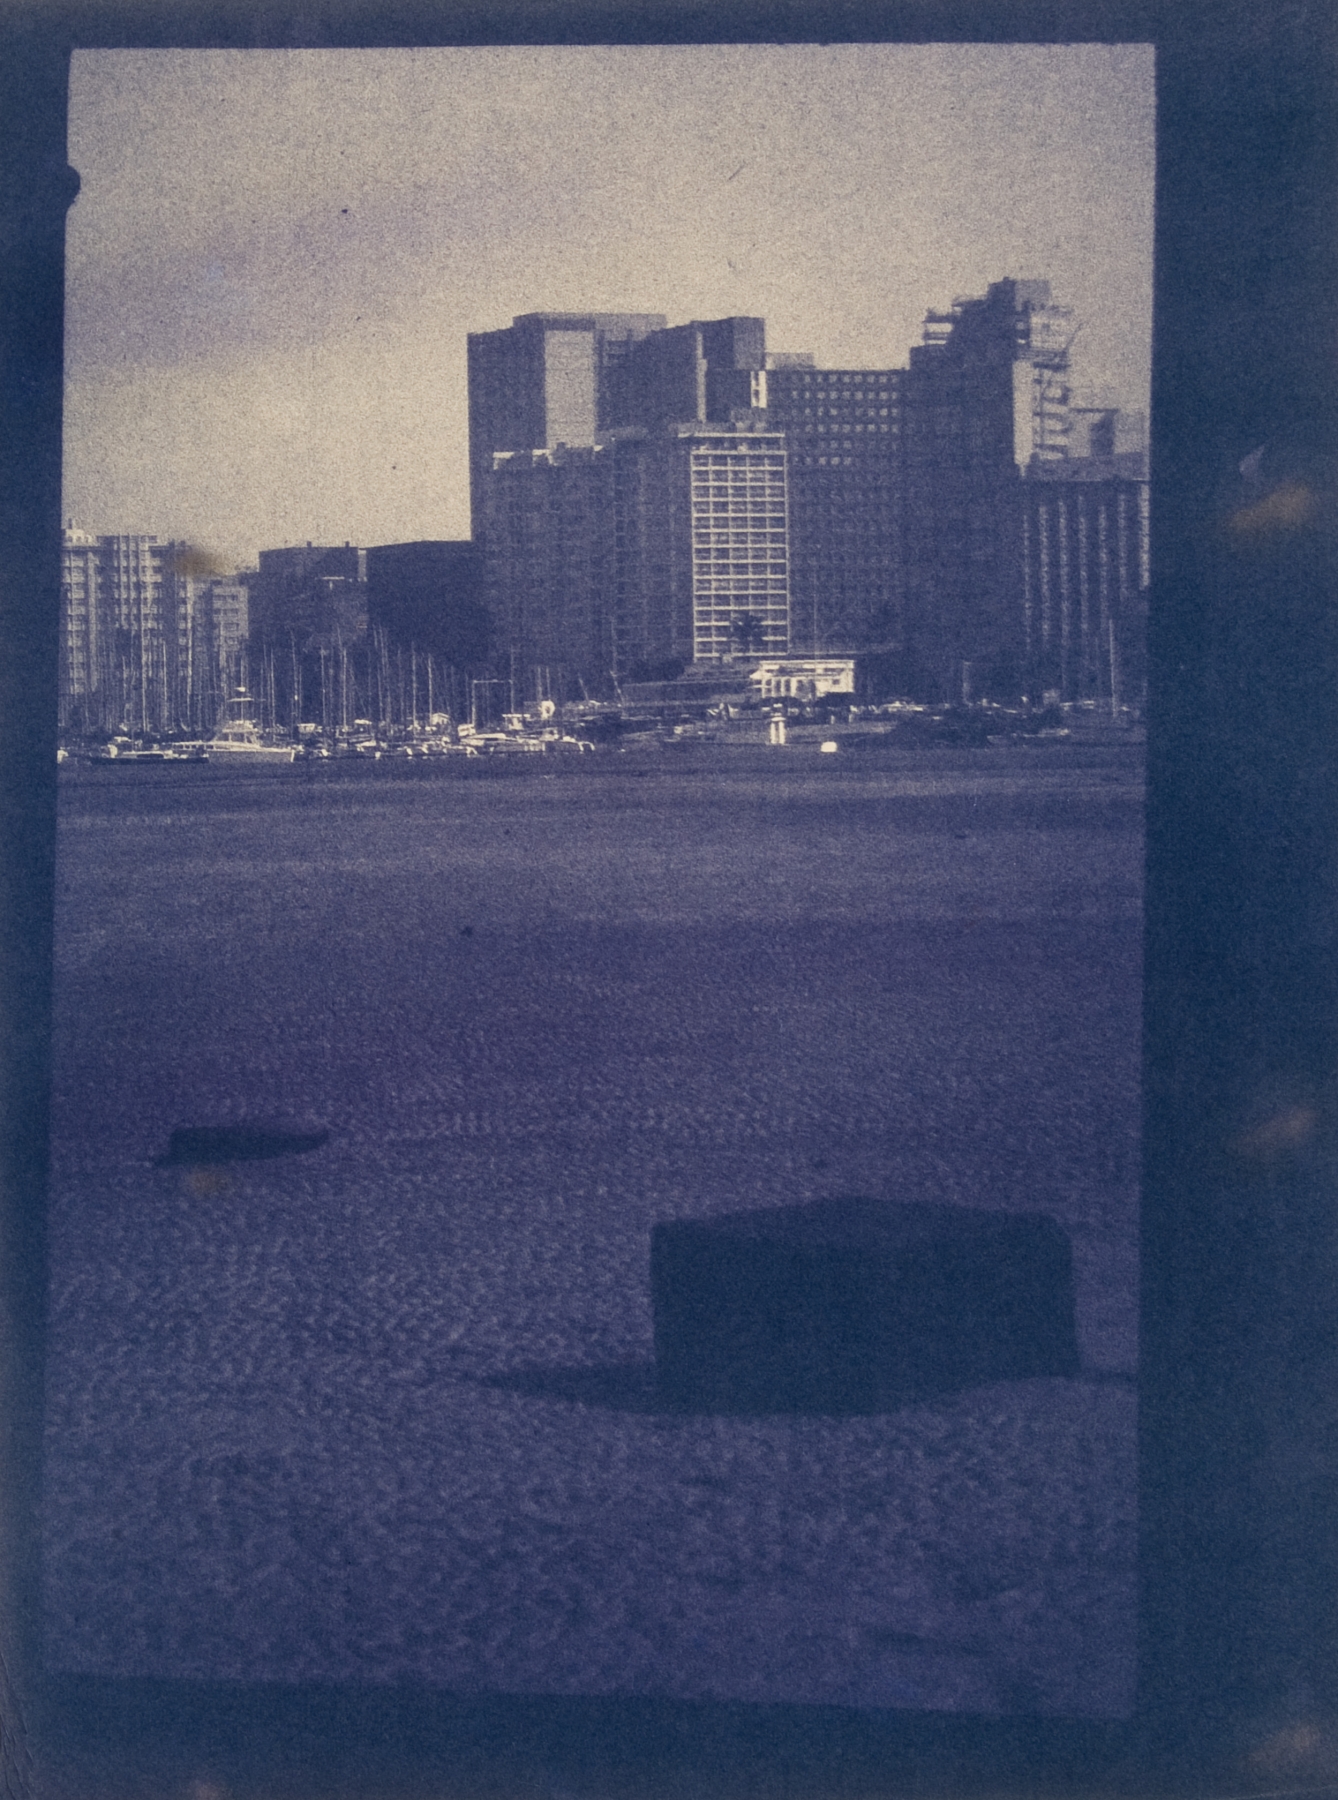 Jeremy Wafer

Harbour series #34, 1988

Ammonia print

84 x 59.4 cm /&amp;nbsp;33 x 23.4 in.

Enquire